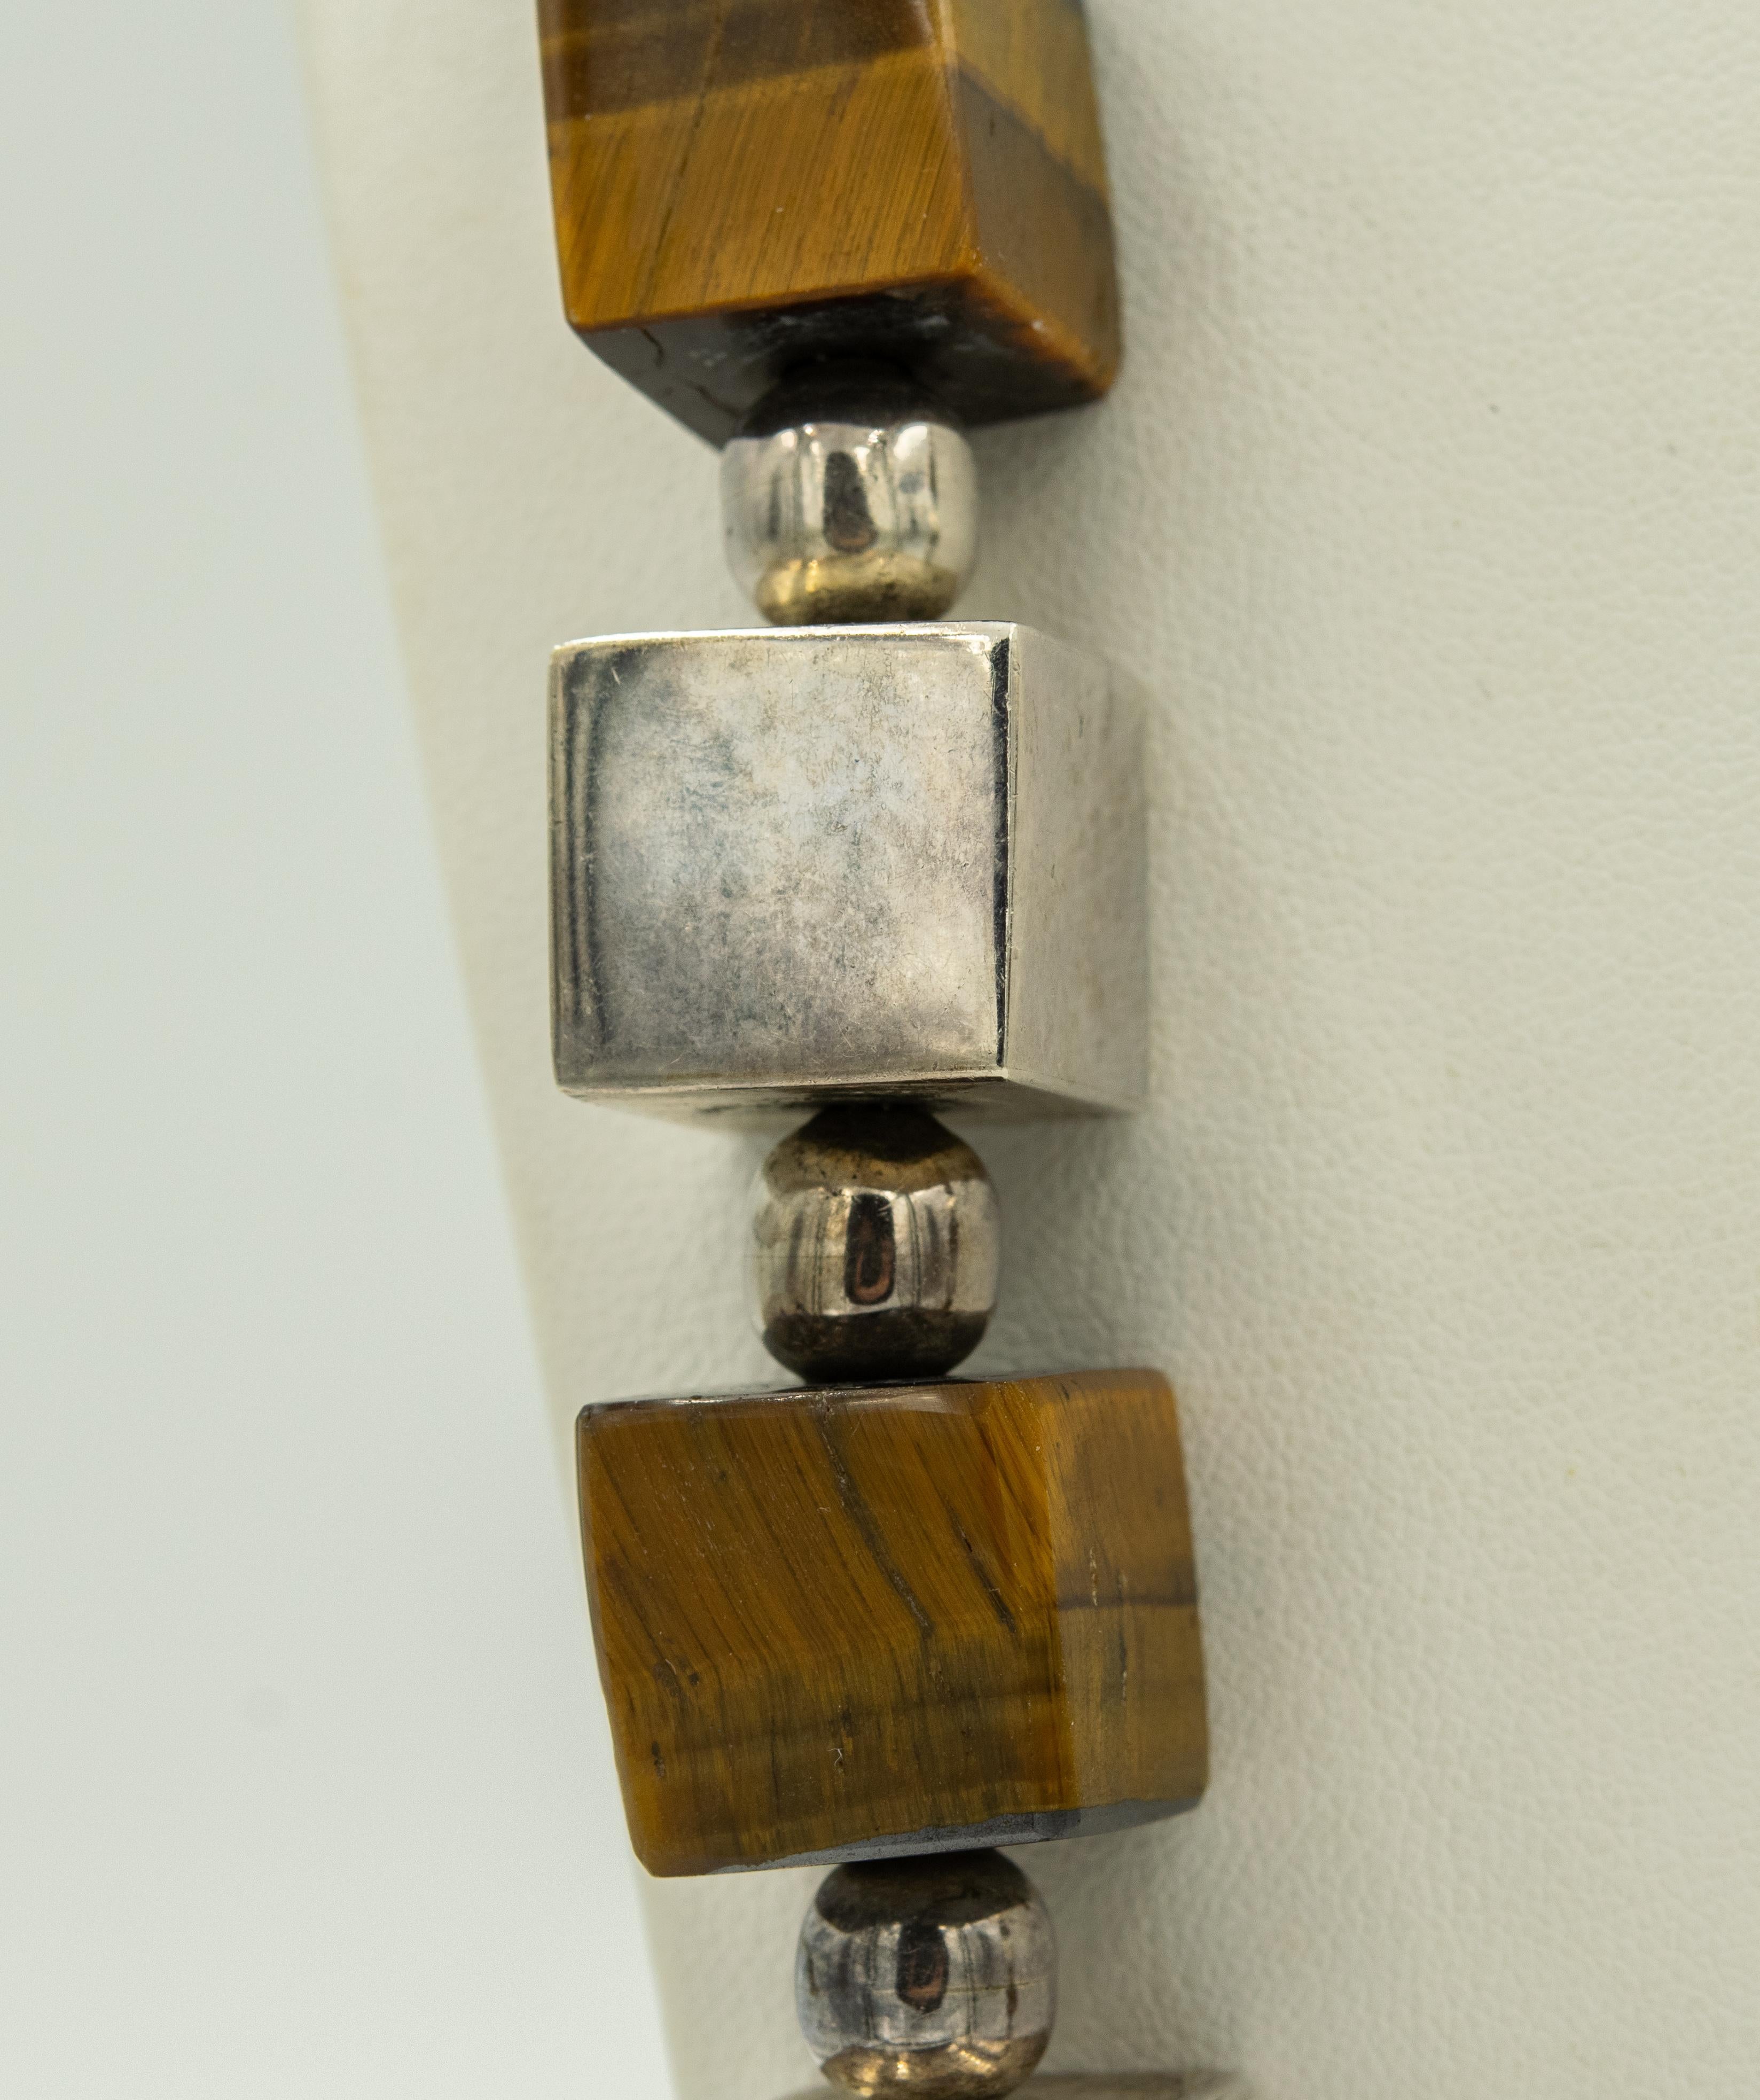 Late 20th century Mexican modernist necklace featuring different sized sterling silver square cubes, circles and tiger's eyes cubes.  The piece is 28.5